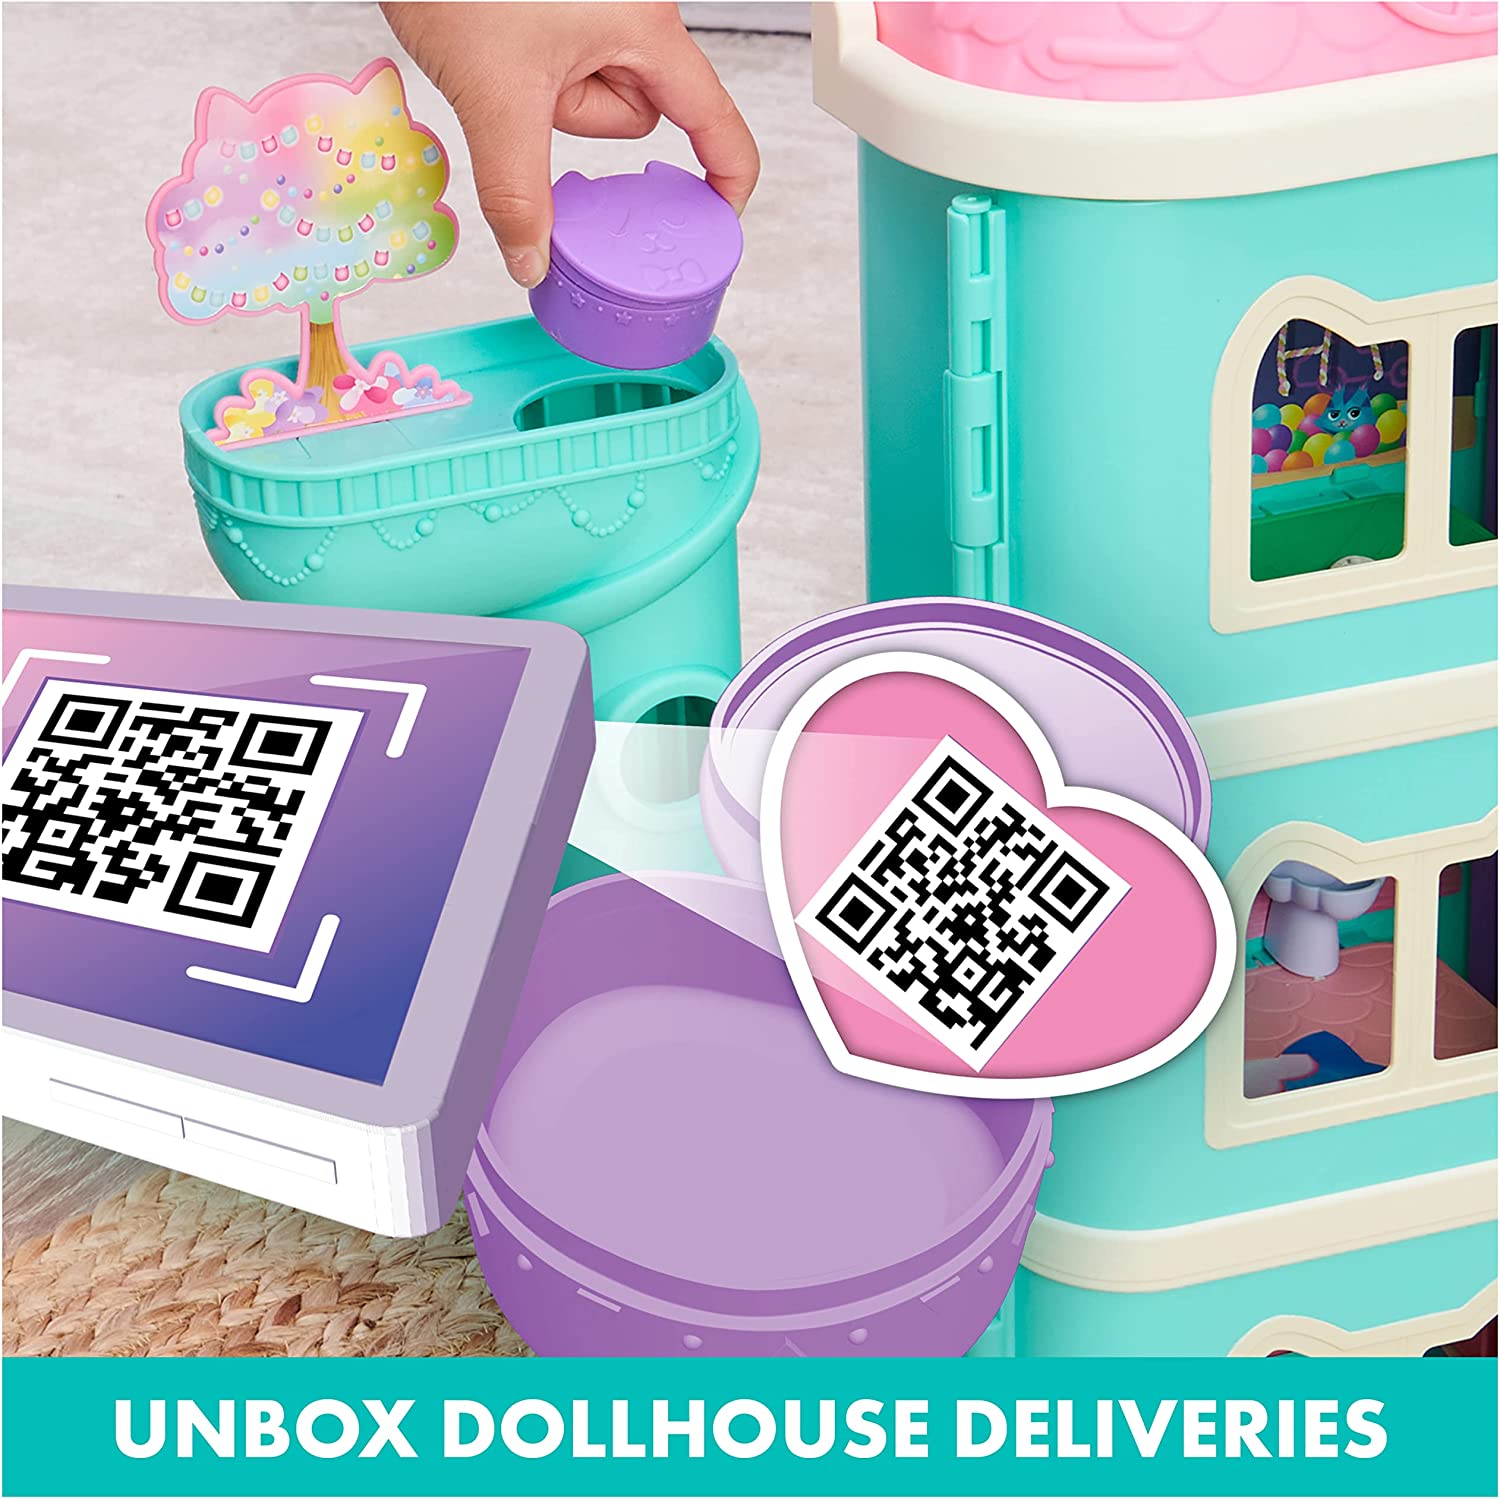  Gabby's Dollhouse, Purrfect Dollhouse with 15 Pieces including  Toy Figures, Furniture, Accessories and Sounds, Kids Toys for Ages 3 and up  : Toys & Games